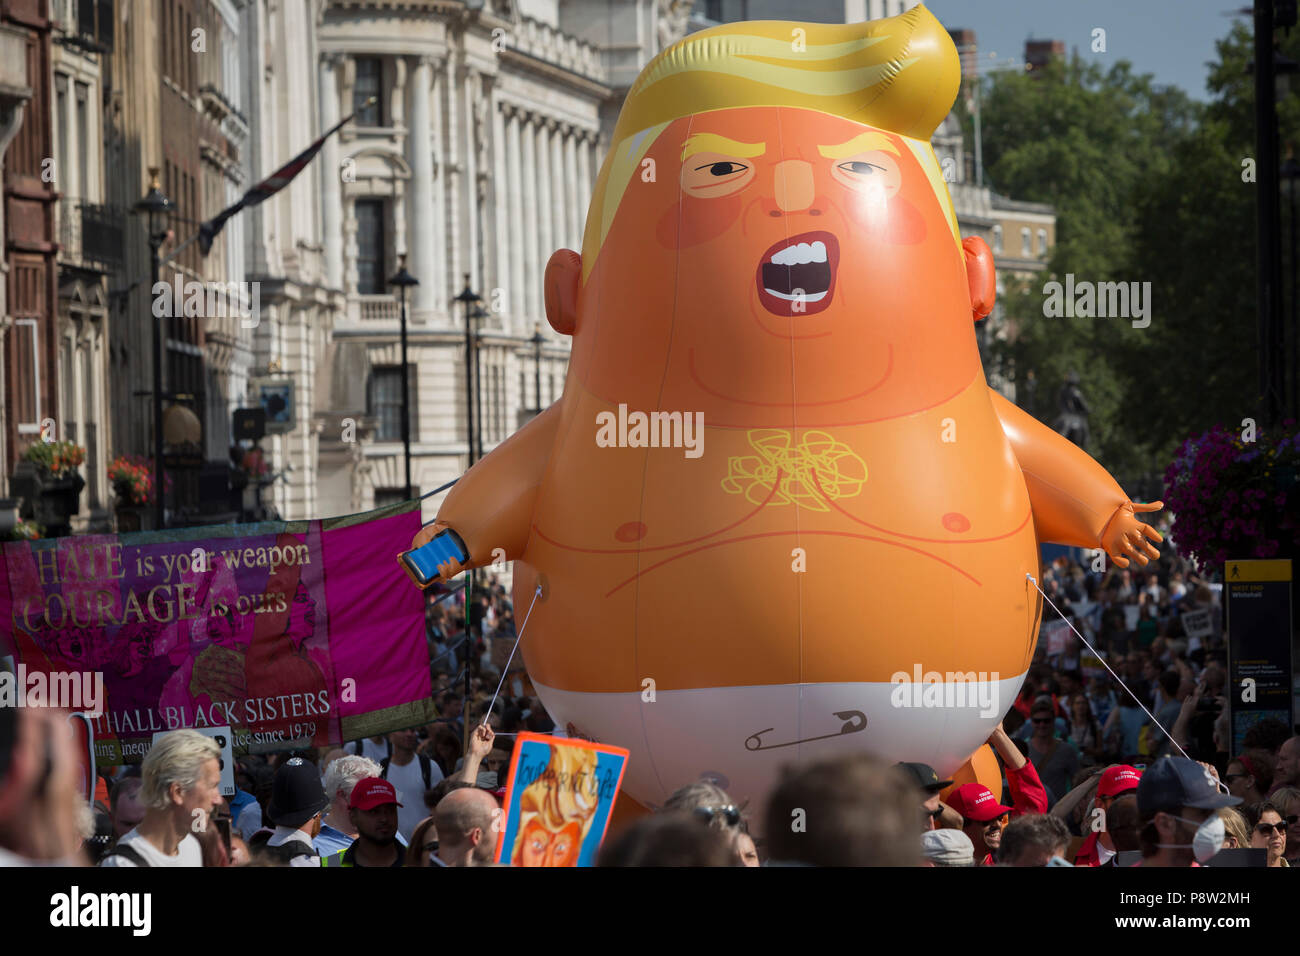 London, UK: The Baby Trump balloon joins protesters against the visit of US President Donald Trump to the UK, march through central London, on 13th July 2018, in London, England. Photo by Richard Baker / Alamy Live News Stock Photo